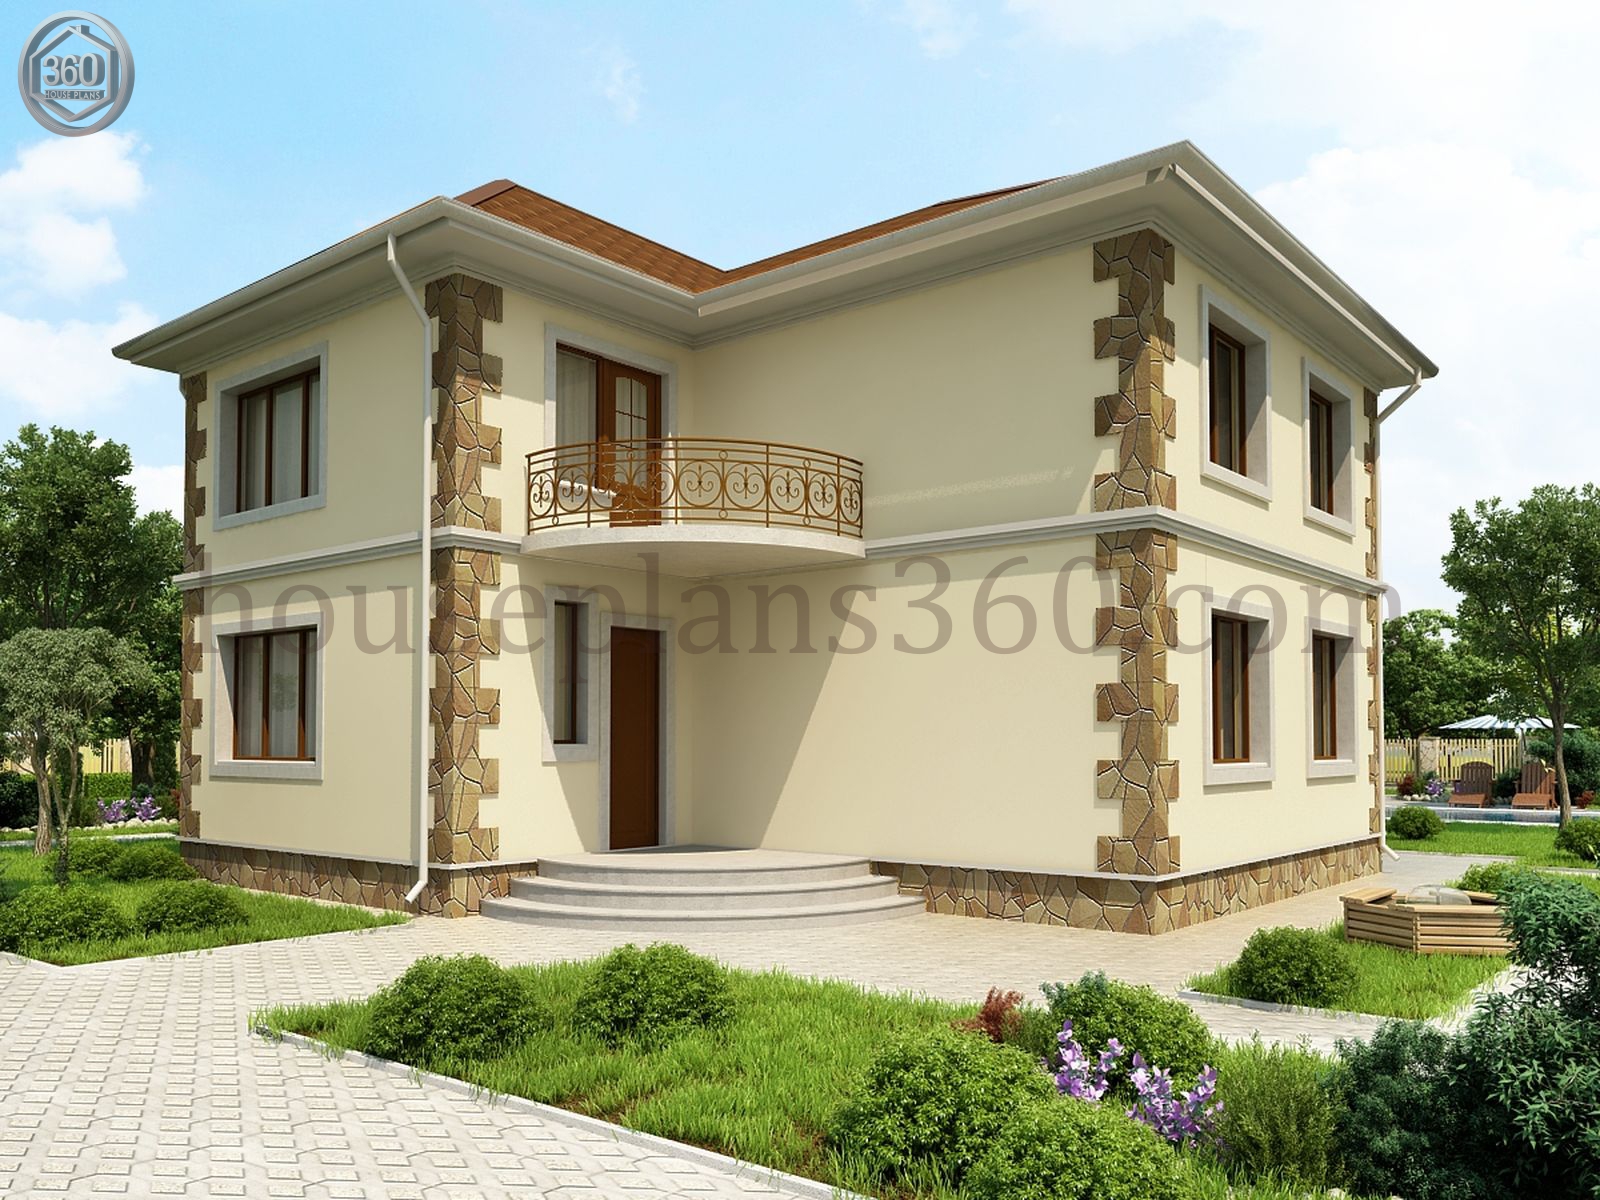 3 bedroom double storey house plans with balcony